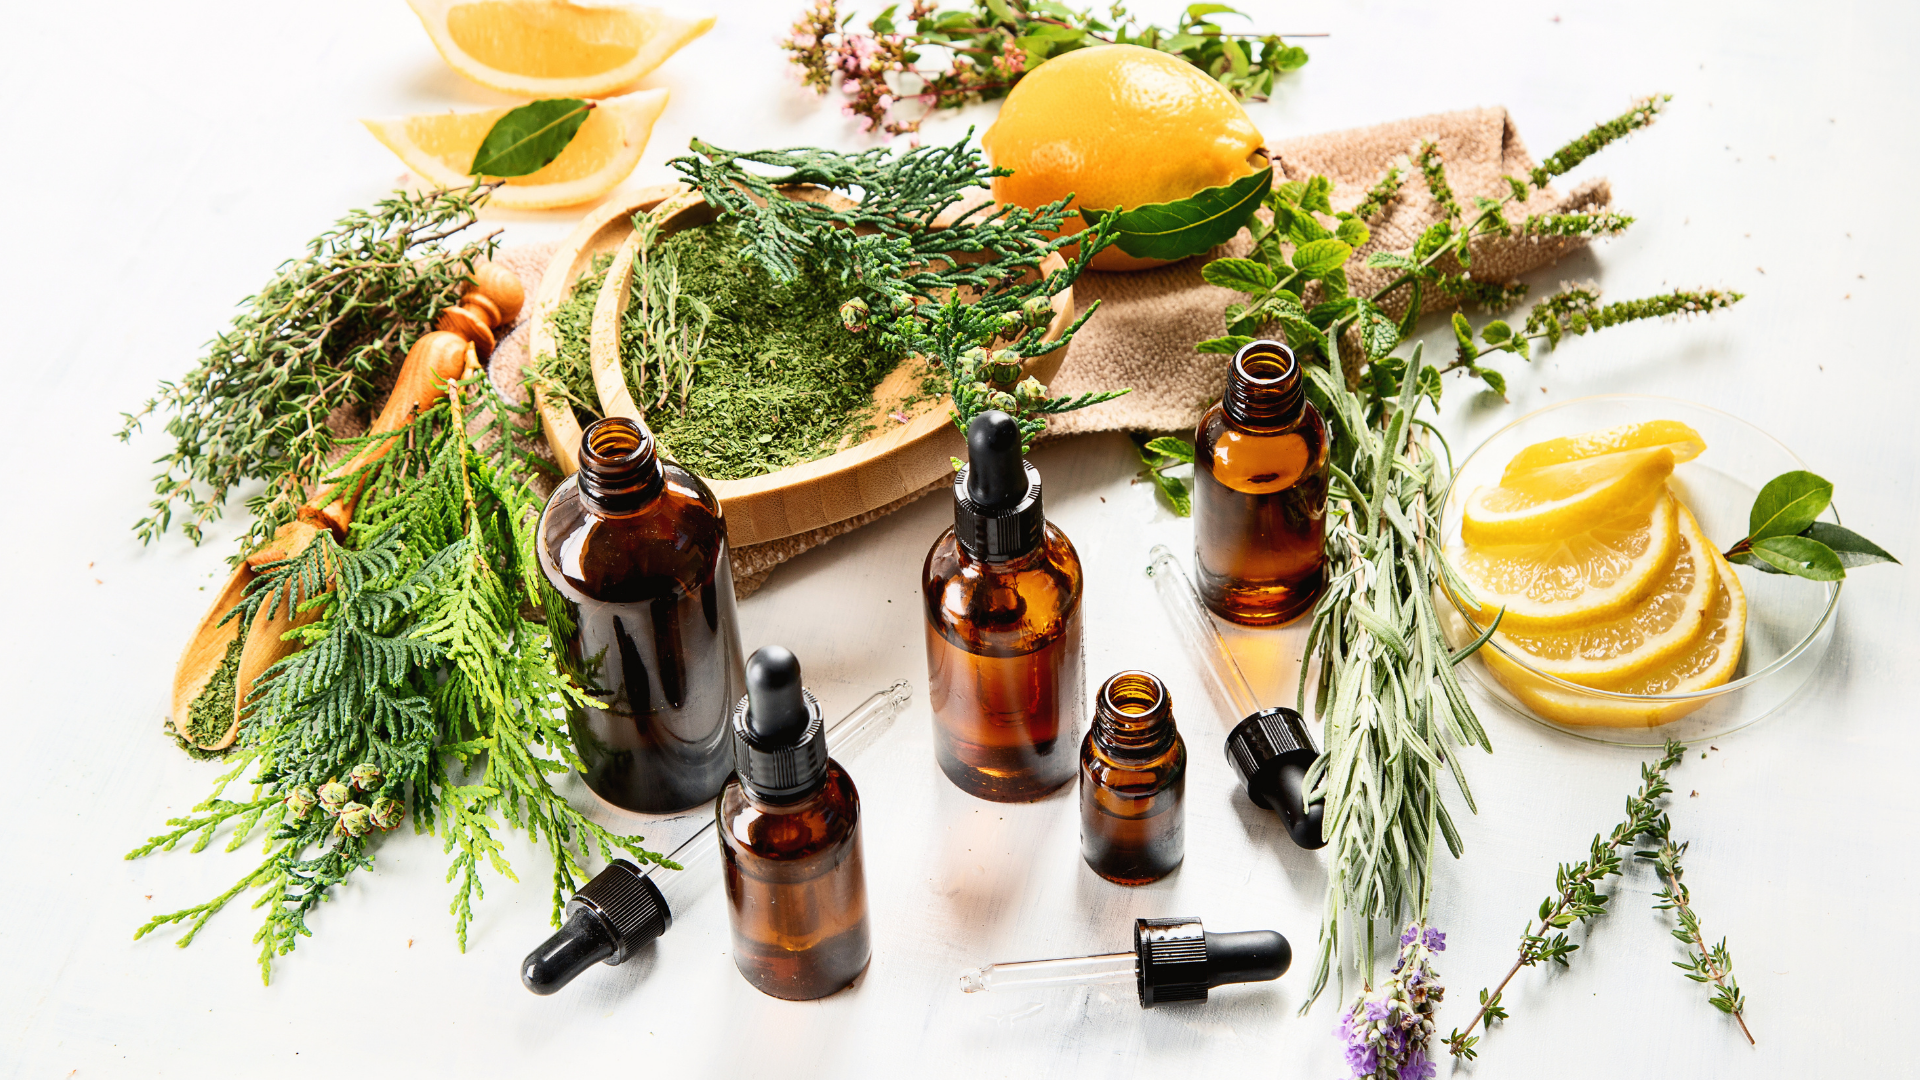 Commonly Used Essential Oils for Relaxation